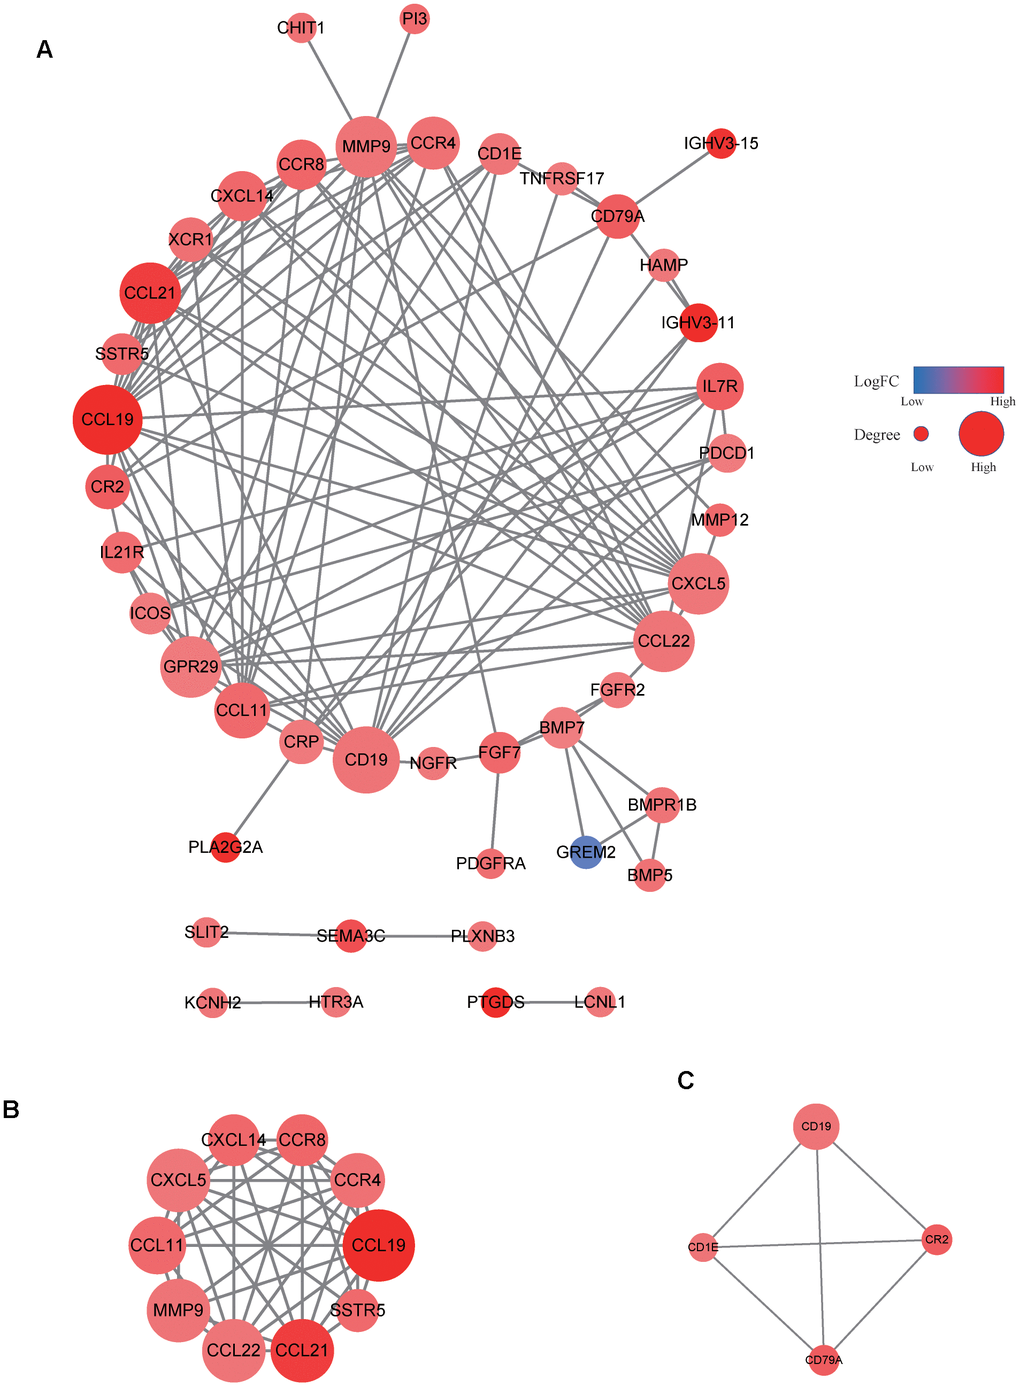 PPI network of immune-related genes. The PPI network consisted of 44 nodes and 112 edges (A). Two important modules were observed via the MCODE algorithm (B, C).